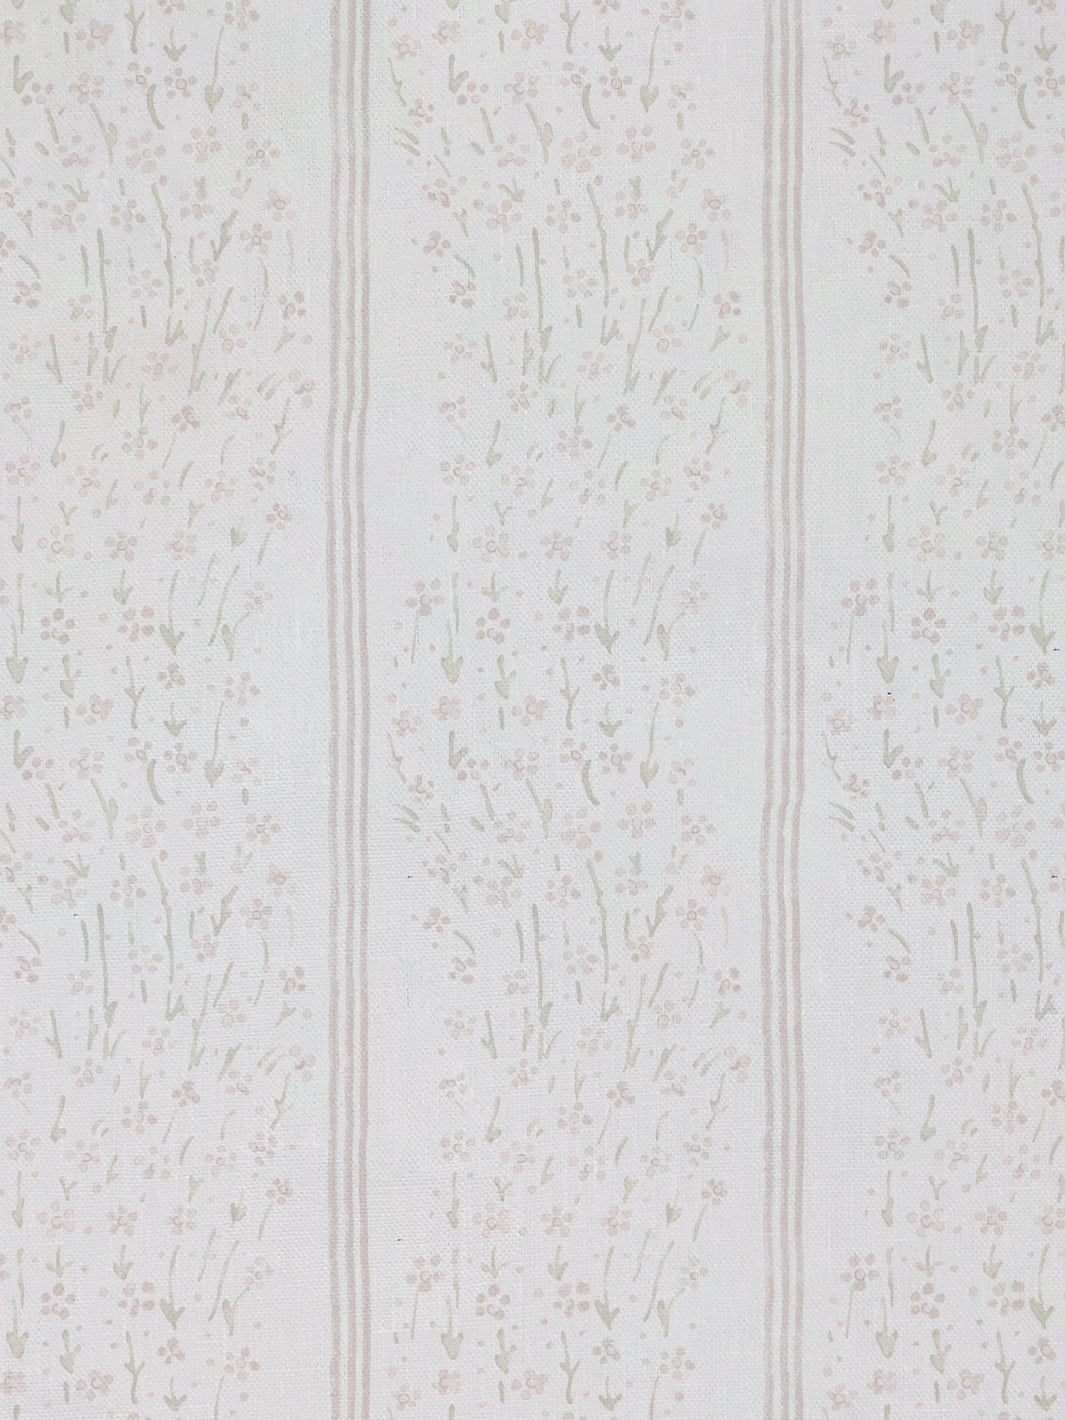 'Hillhouse Floral Ditsy Wave Stripe' Linen Fabric by Nathan Turner - Pink Green